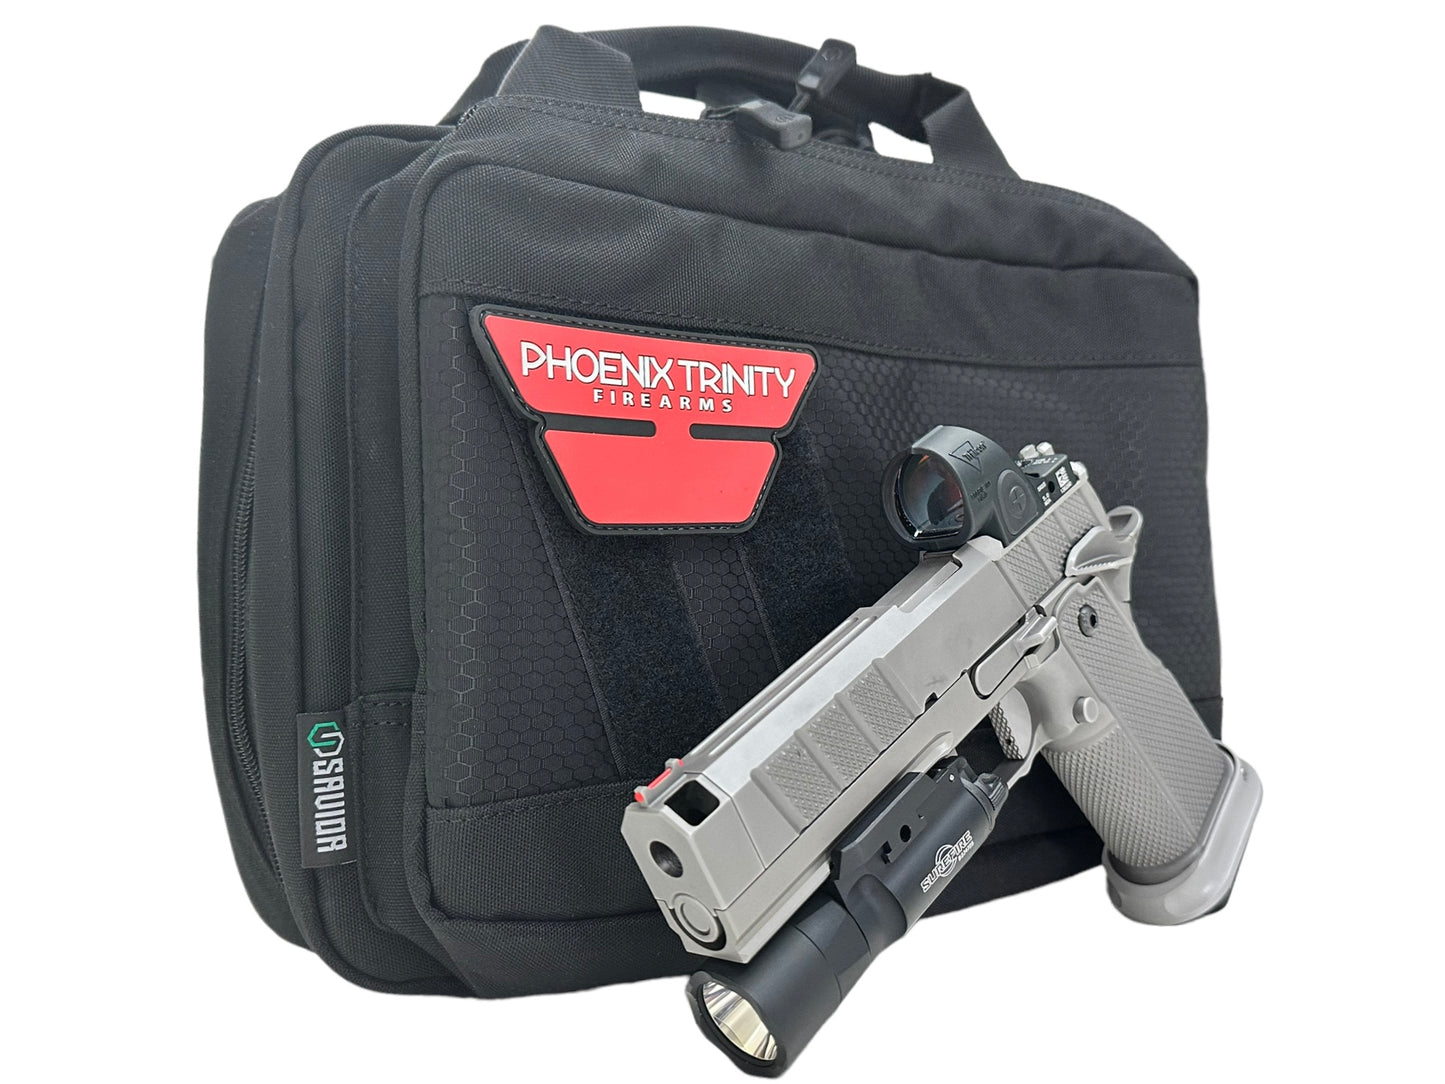 PHOENIX TRINITY H SERIES H PRO DOUBLE STACK HARD CHROME WITH SS GRIPS , SRO AND X300